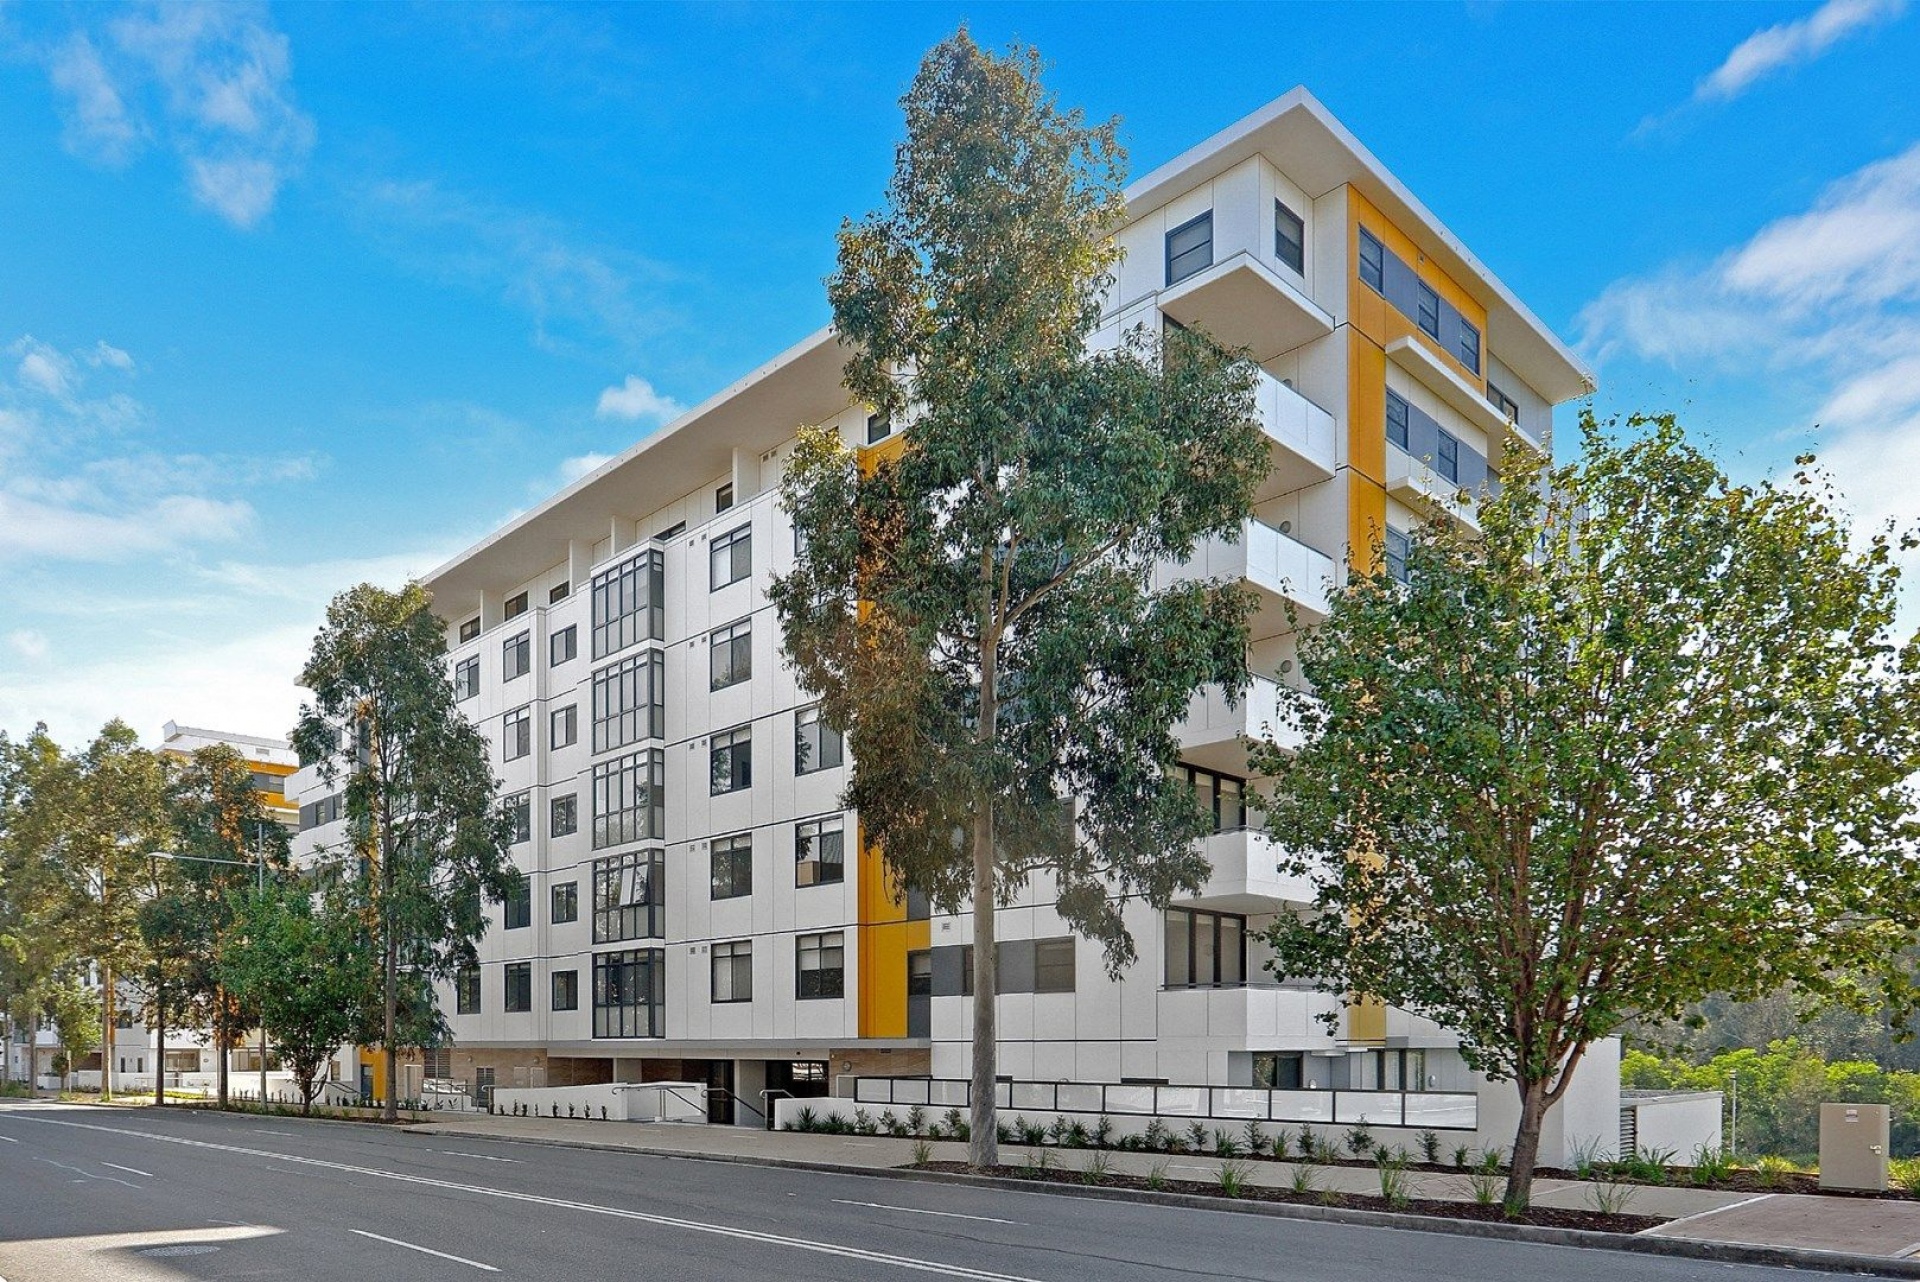 2 Bedrooms, Apartment, Leased, Caddies Boulevard, 2 Bathrooms, Listing ID 1272, Rouse Hill, NSW, Australia,